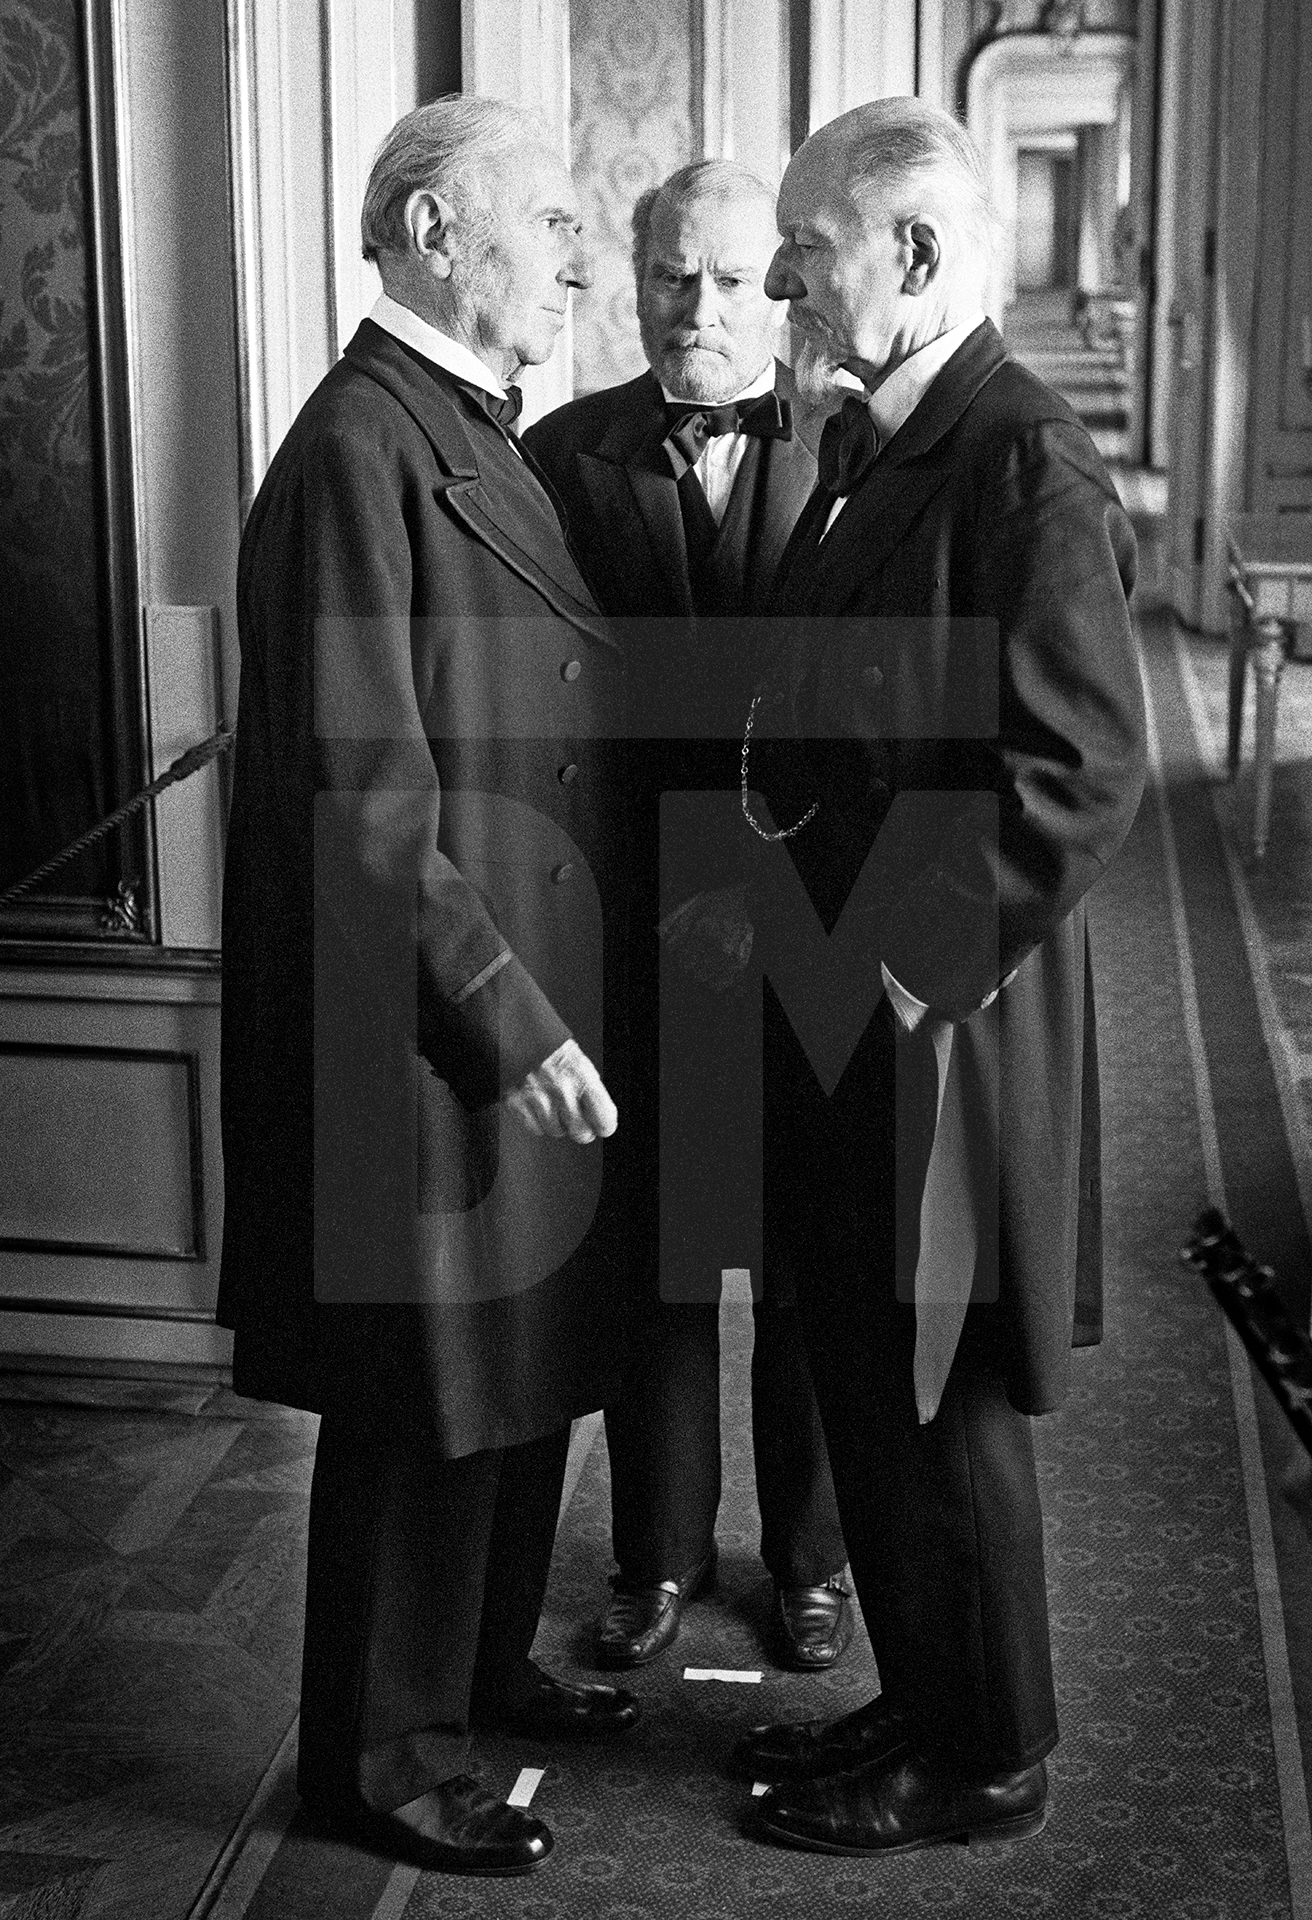 Sir Ralph Richardson [Pfordten], Lord Olivier [Pfeufer], Sir John Gielgud [Pfistermeister] officials at the court of ‘mad’ King Ludwig II of Bavaria, on set at the Hofburg Palace, Vienna. Tony Palmer’s ‘Wagner’, January 1982 by Daniel Meadows